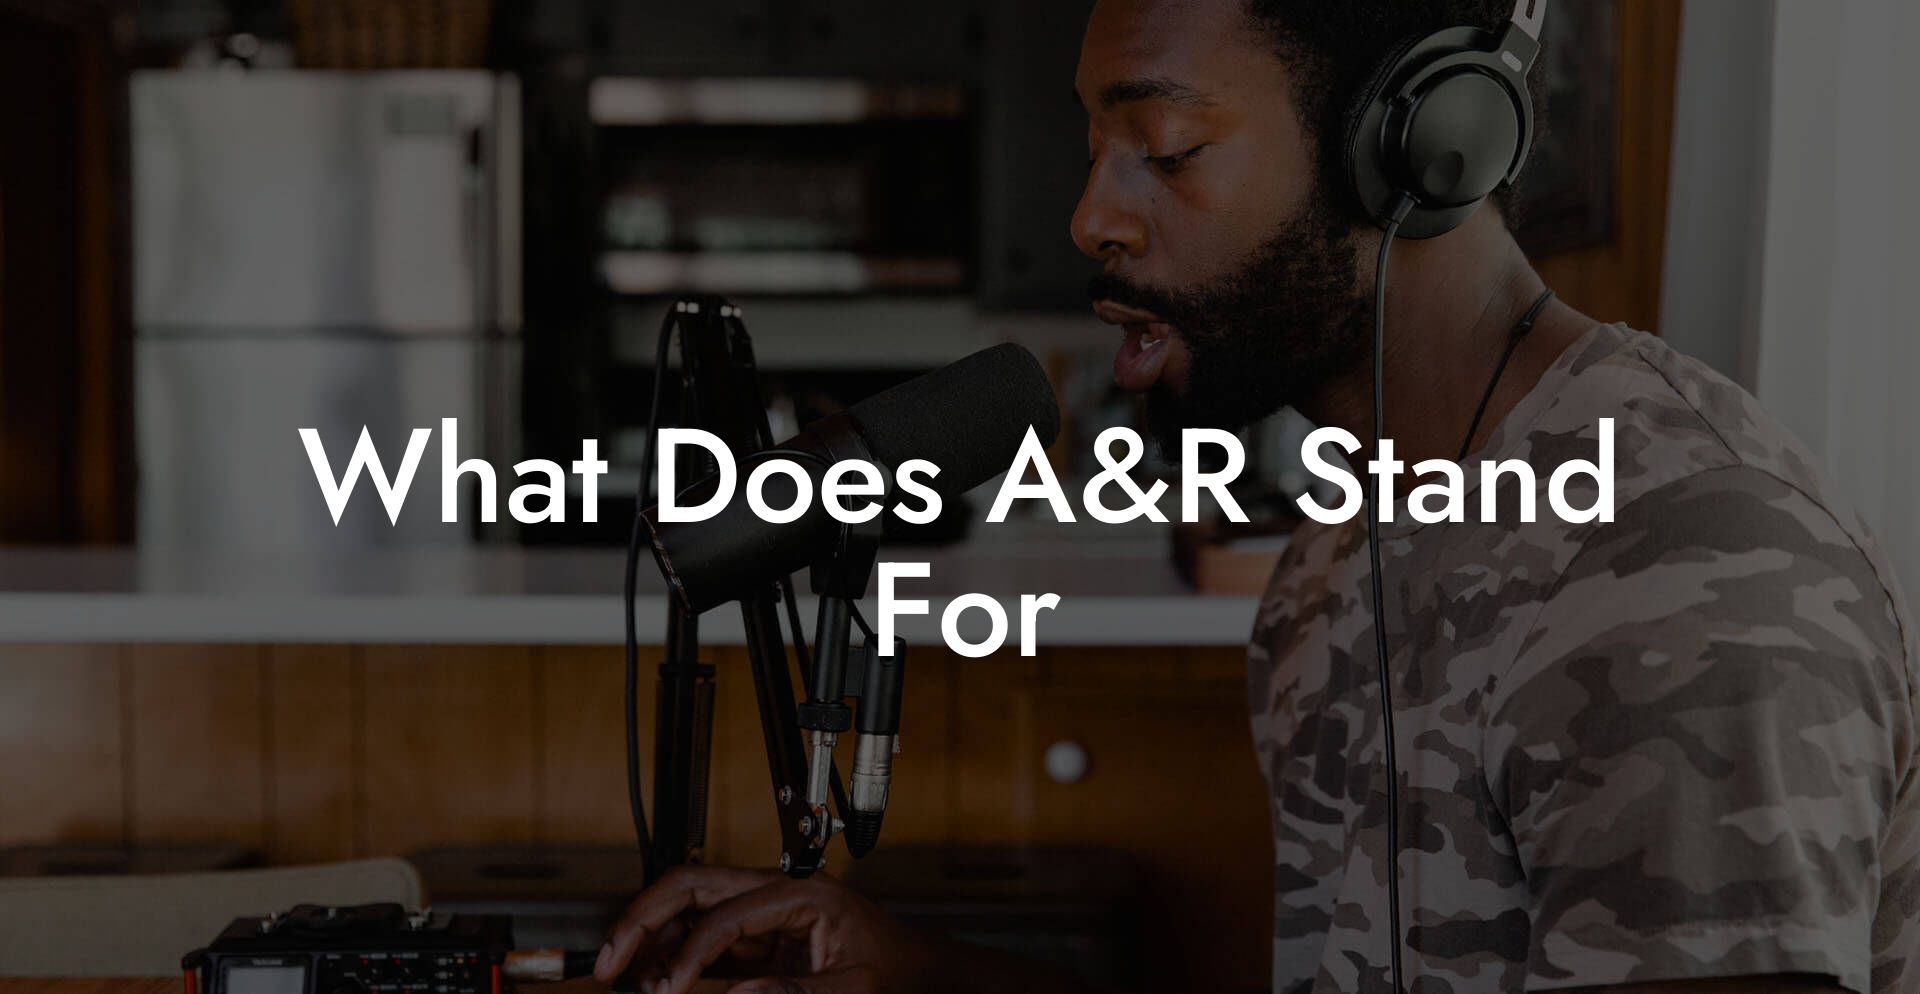 What Does A&R Stand For